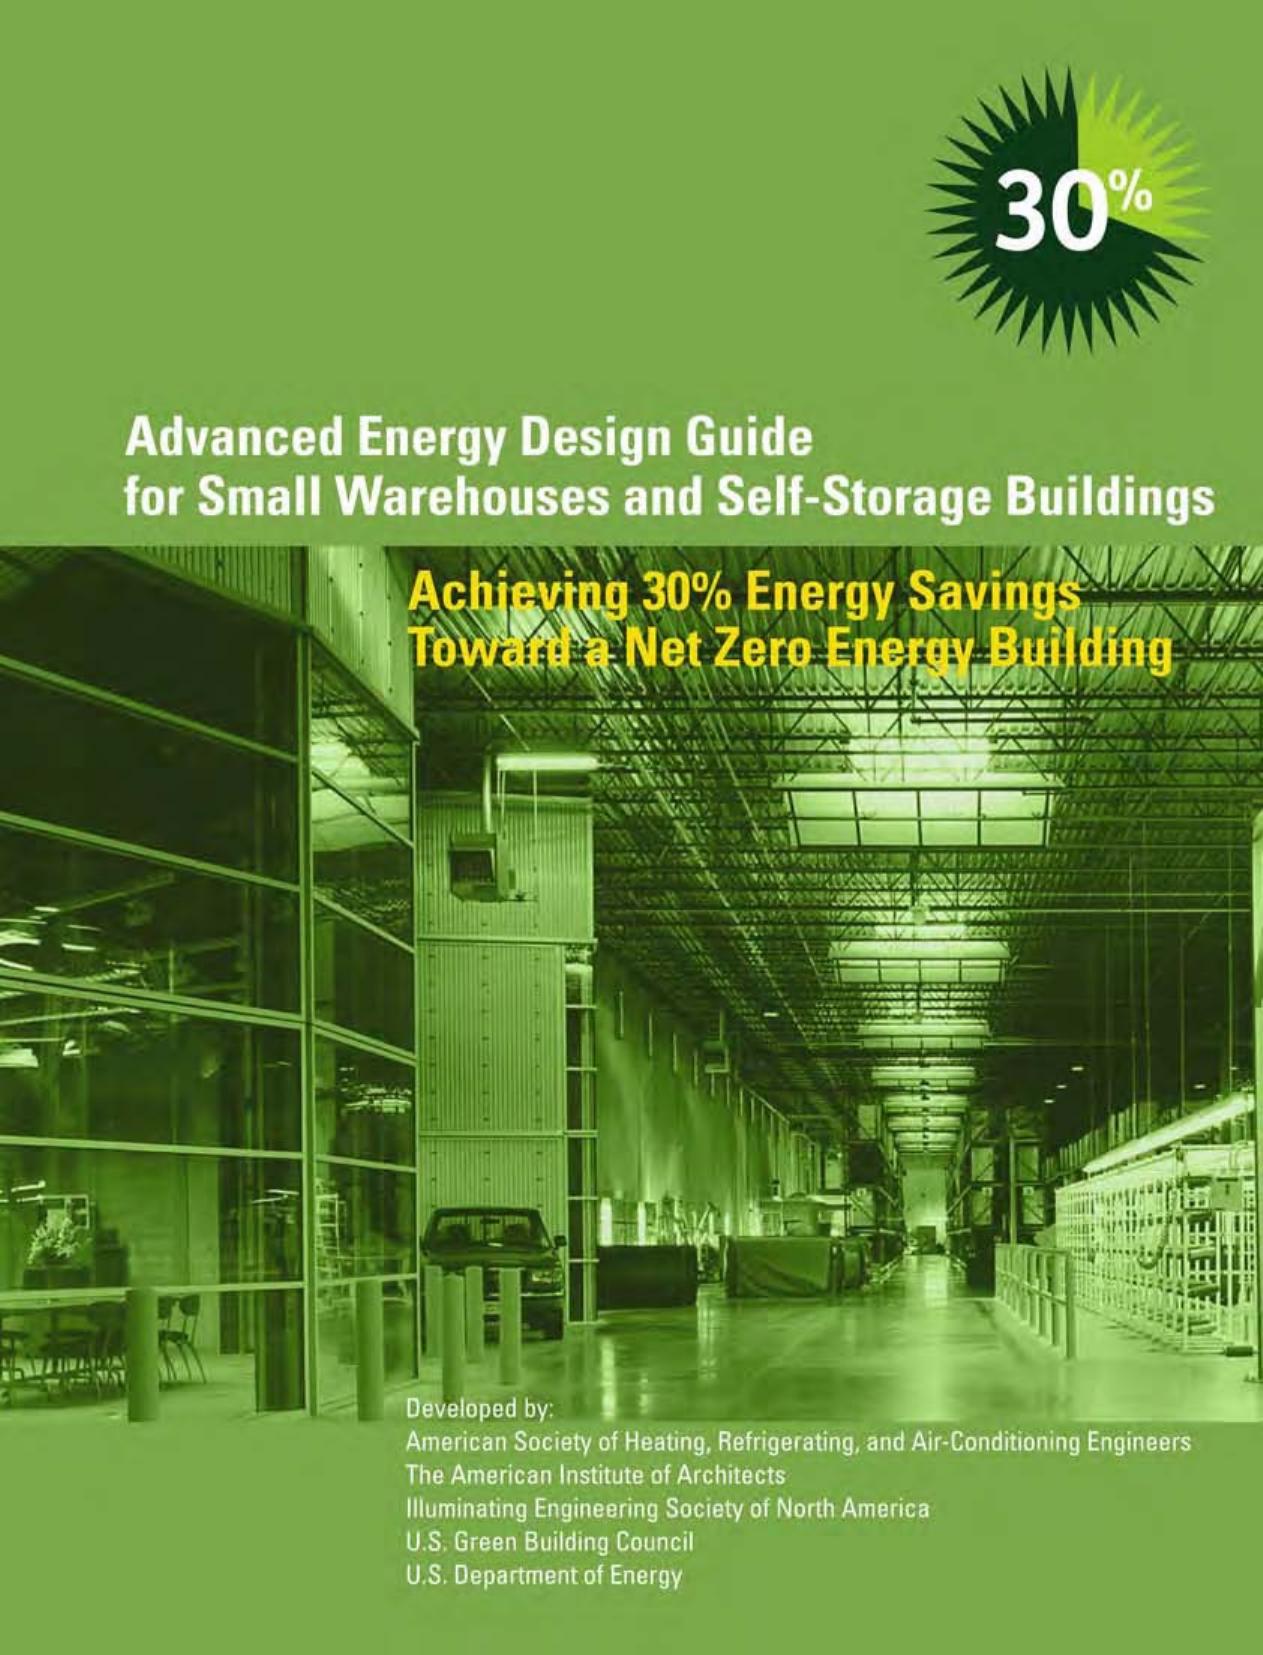 American Society of Heating, Refrigerating and Air-Cond by Advanced Energy Design Guide for Small Warehouses & Self-Storage Buildings (2008)(94s)